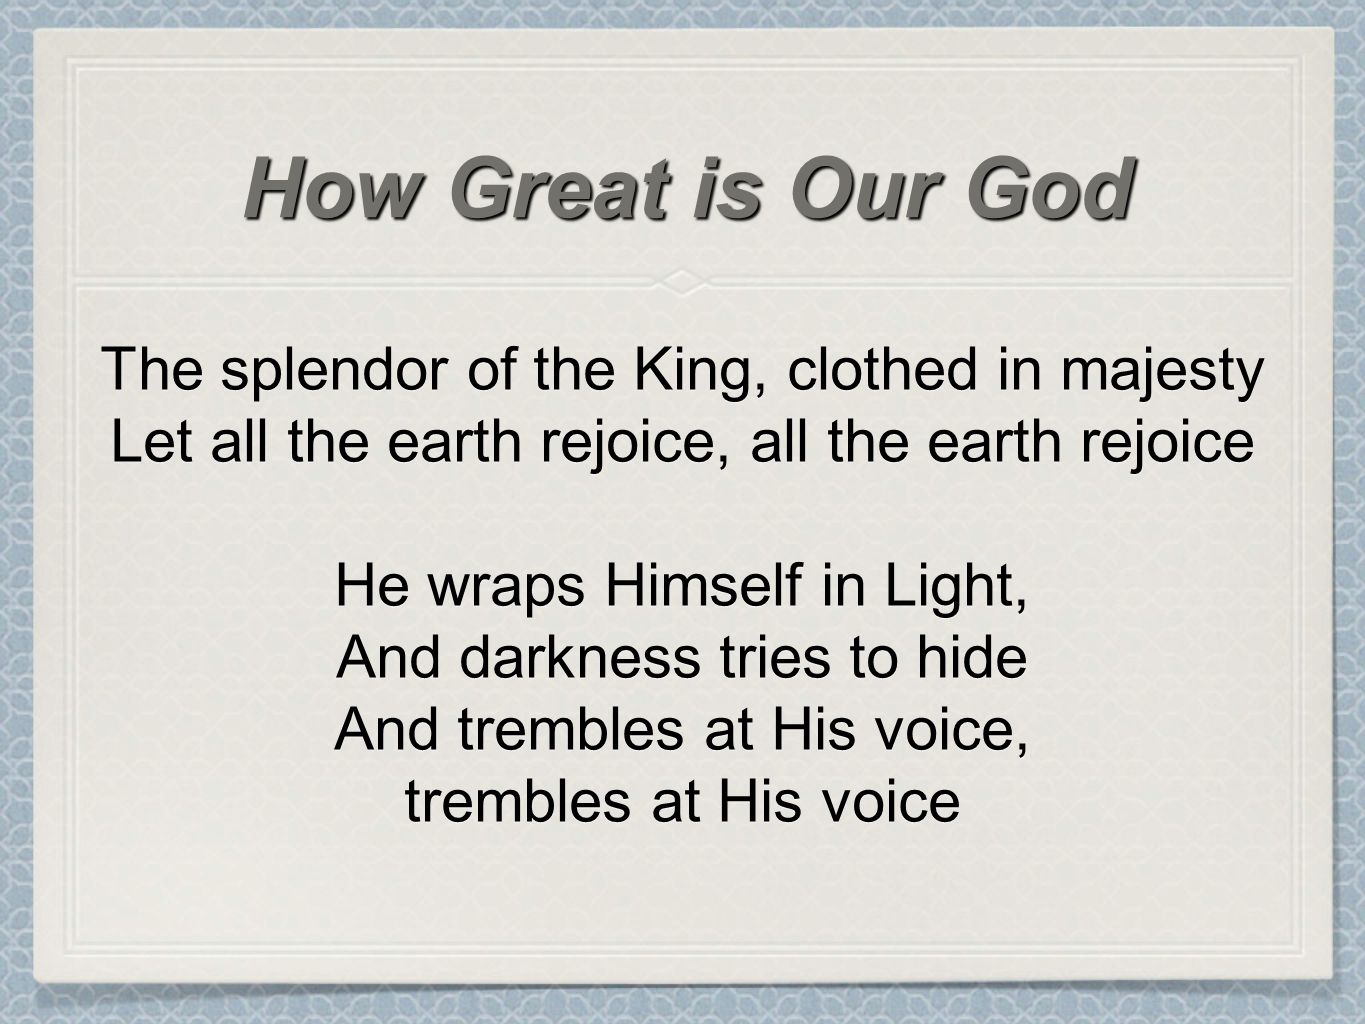 The splendor of the King, clothed in majesty Let all the earth rejoice, all the earth rejoice He wraps Himself in Light, And darkness tries to hide And trembles at His voice, trembles at His voice How Great is Our God